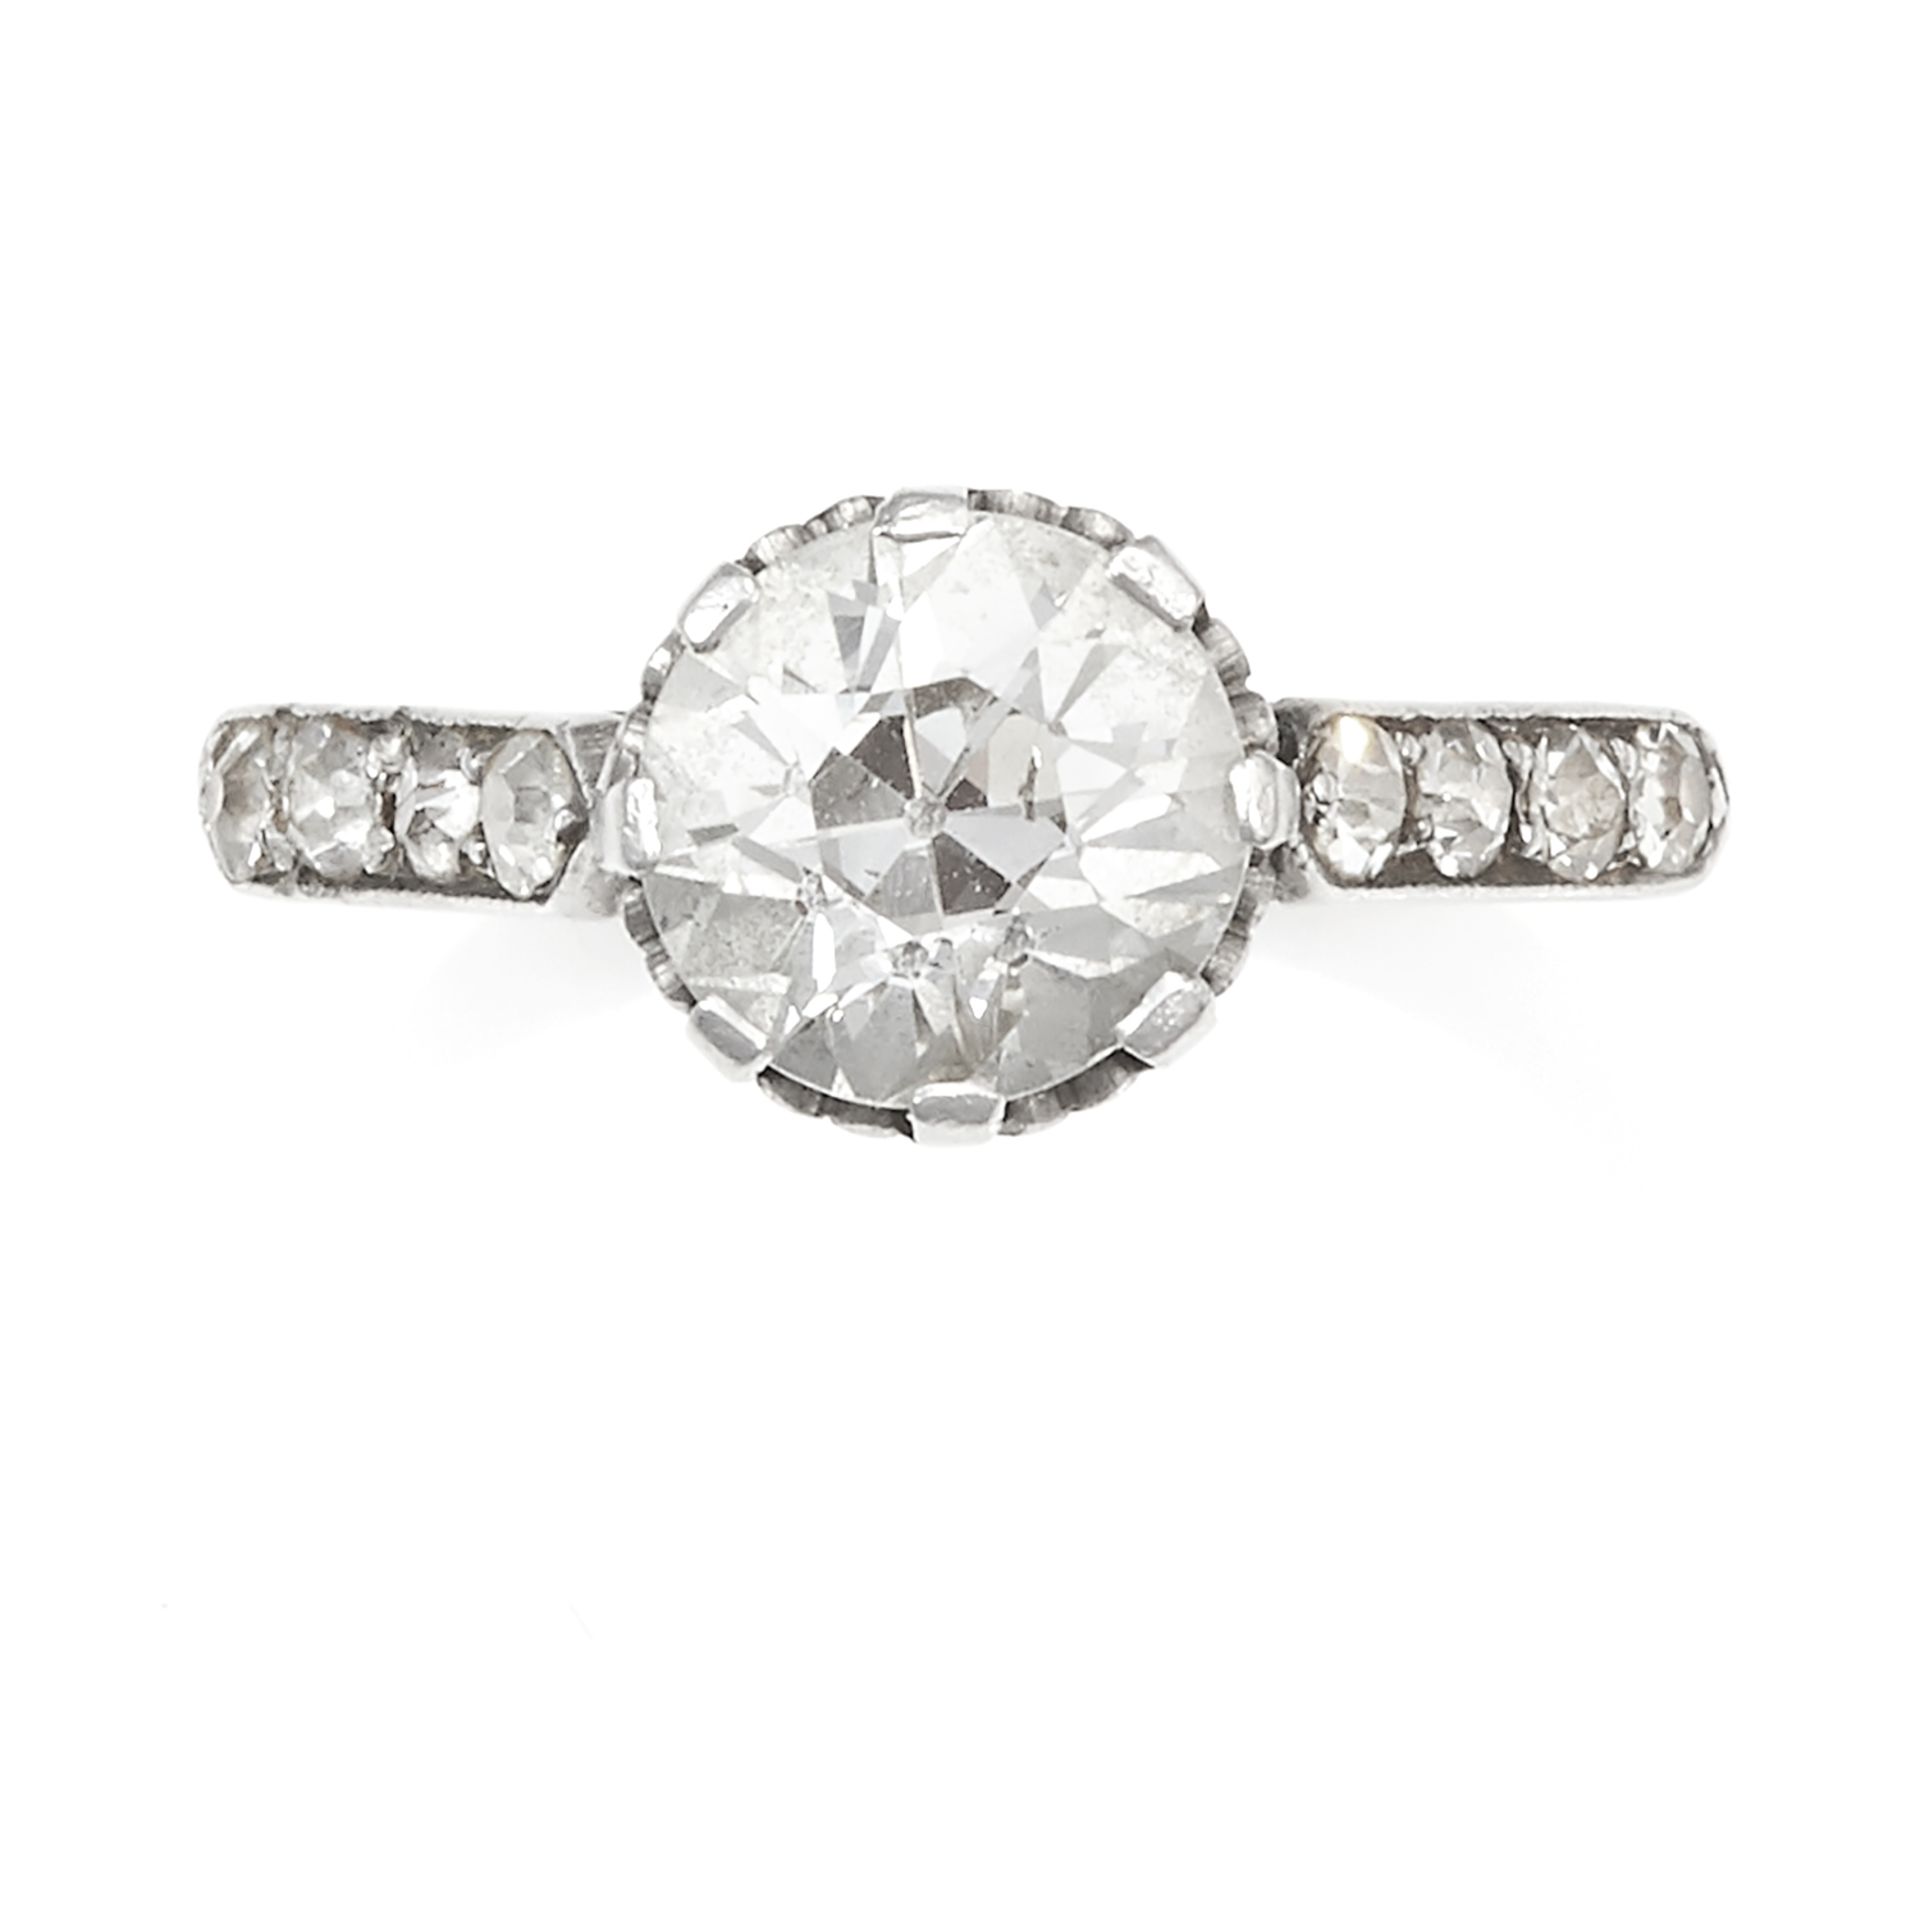 AN ANTIQUE 1.80 CARAT SOLITAIRE DIAMOND RING in white gold or platinum, set with an old European cut